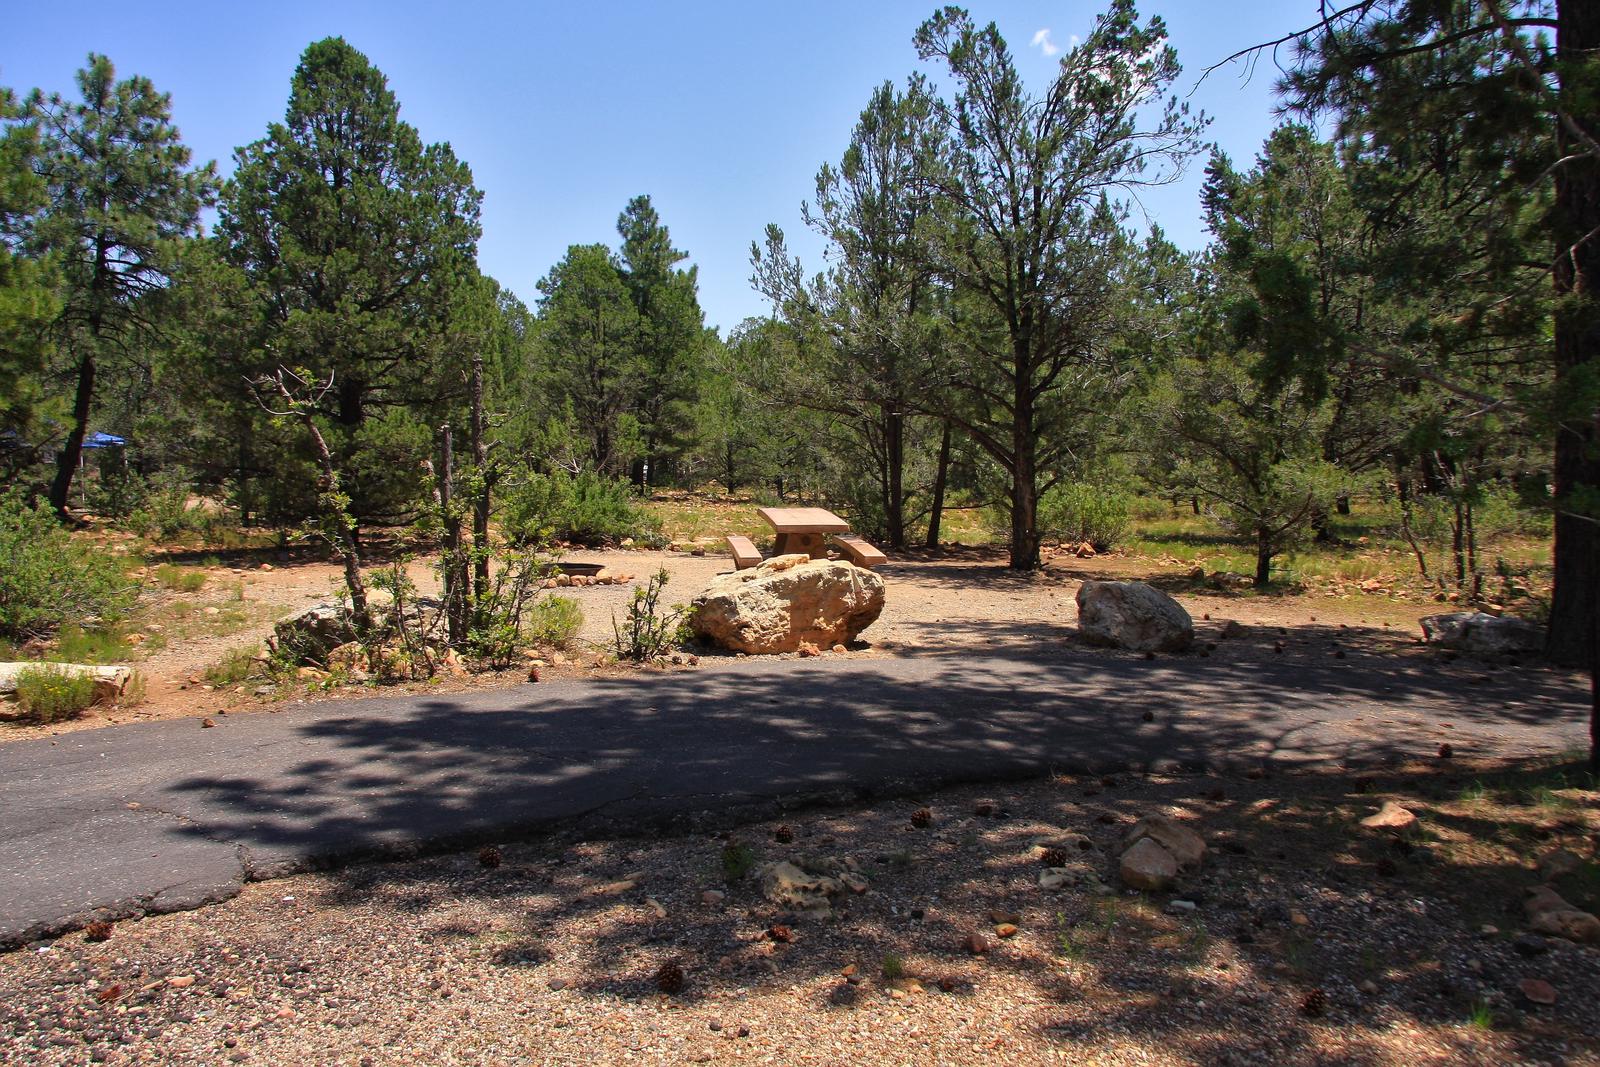 Picnic table, fire pit, and parking spot, Mather CampgroundPicnic table, fire pit, and parking spot for Juniper Loop 141, Mather Campground